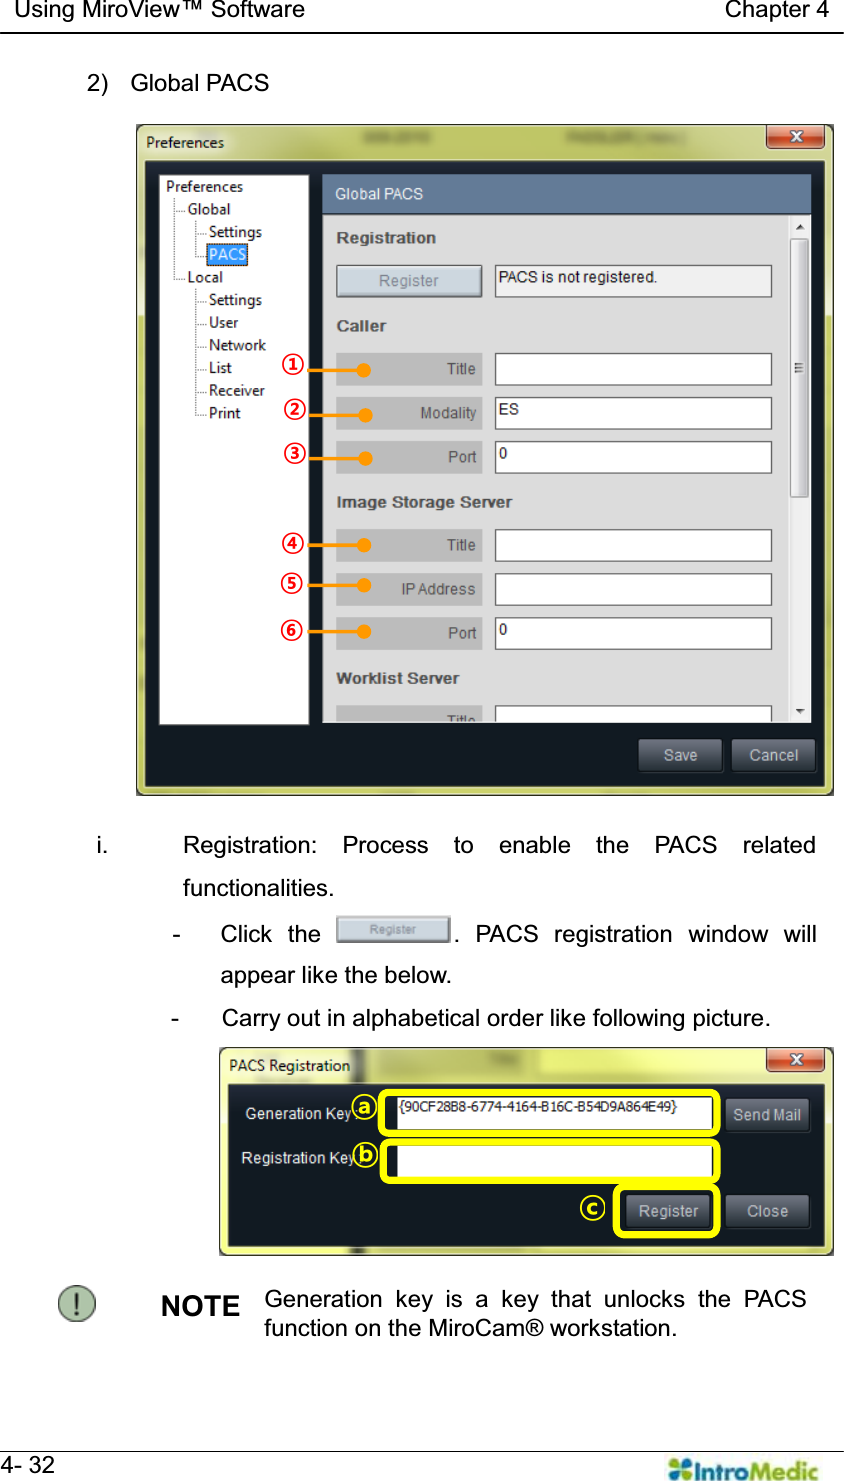   Using MiroView Software                                   Chapter 4   4- 32 2) Global PACS   i.  Registration: Process to enable the PACS related functionalities. - Click the  . PACS registration window will appear like the below. -  Carry out in alphabetical order like following picture.  NOTE  Generation key is a key that unlocks the PACS function on the MiroCam® workstation.  ¢ £ ¤ § ¦ ¥ ÚÛÜ